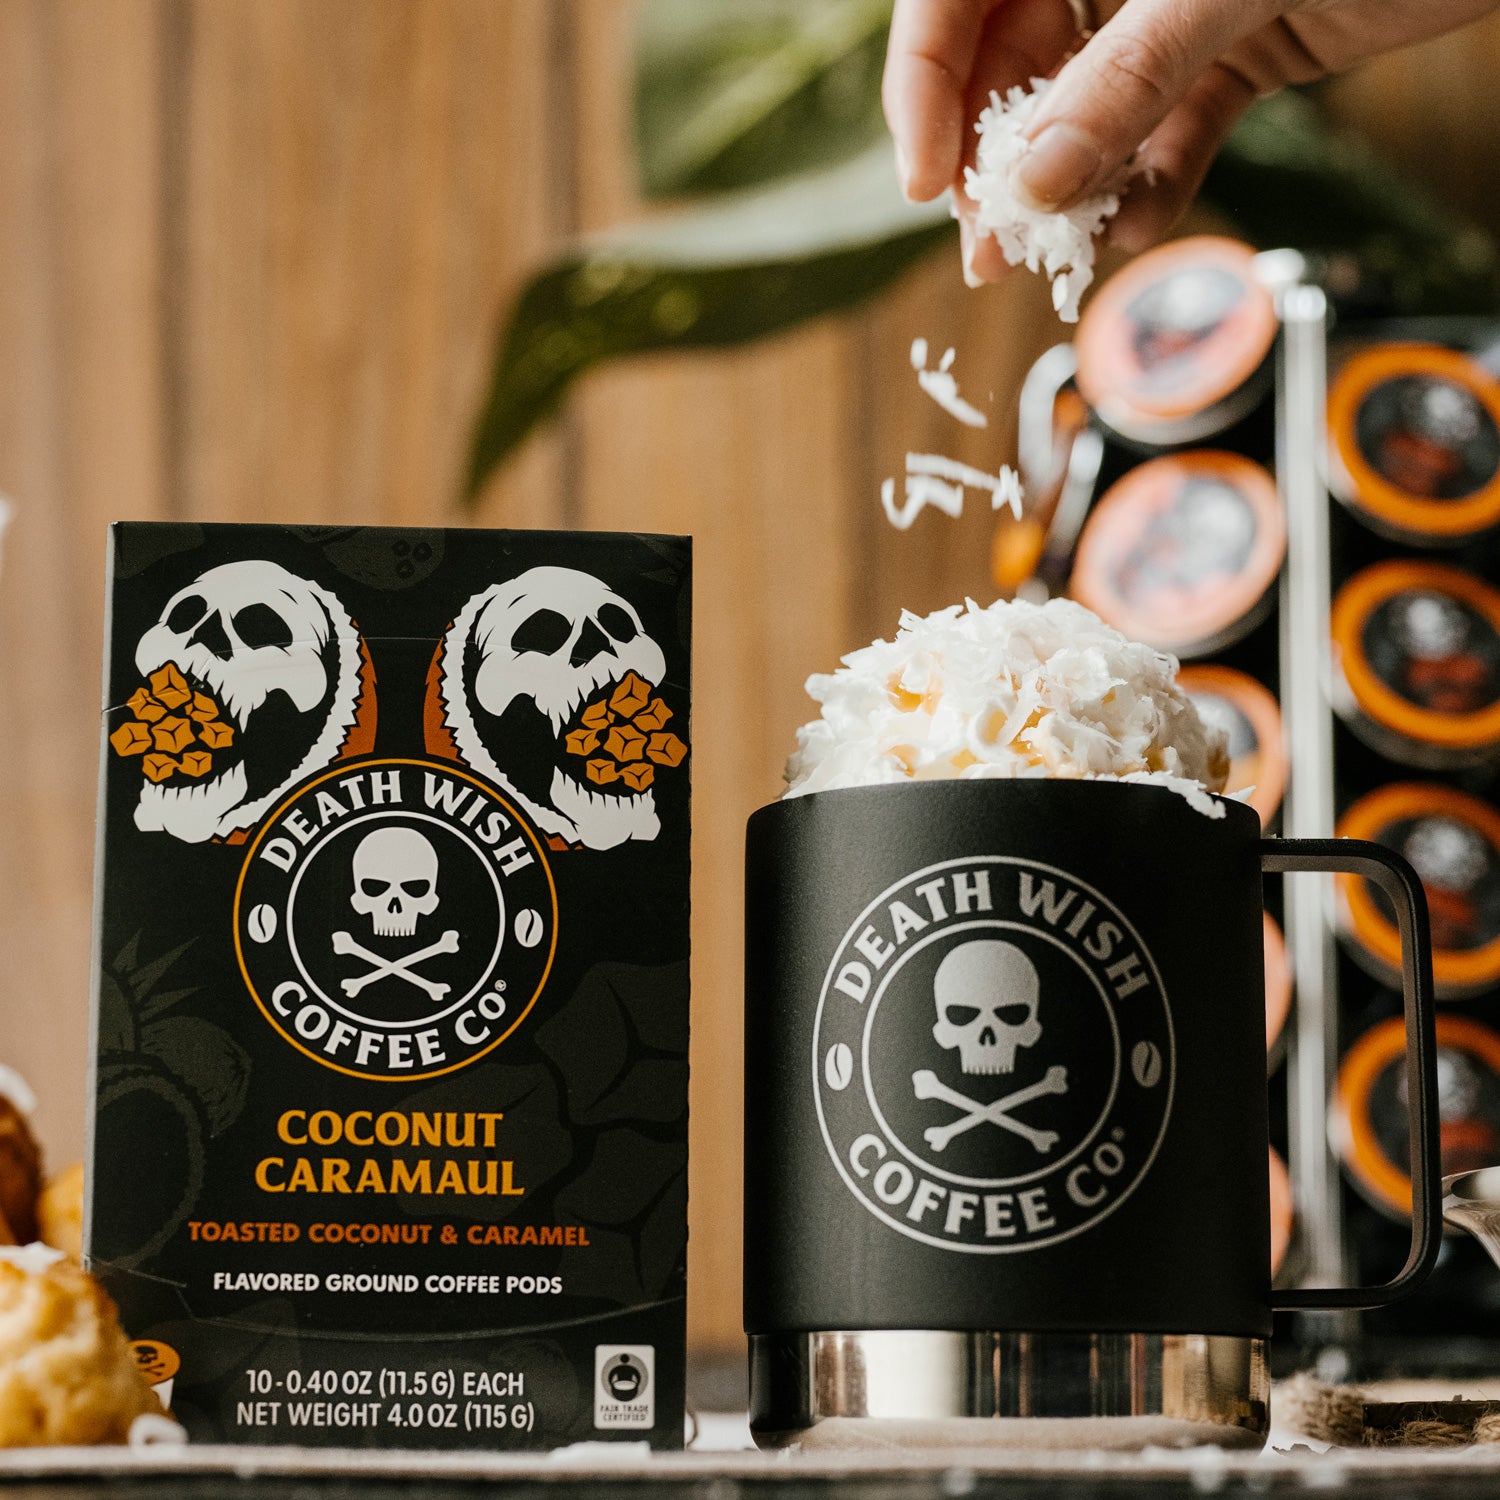 Making Death Wish Coffee Coconut Caramaul Flavored Coffee using single-serve pods and fresh coconut topping.